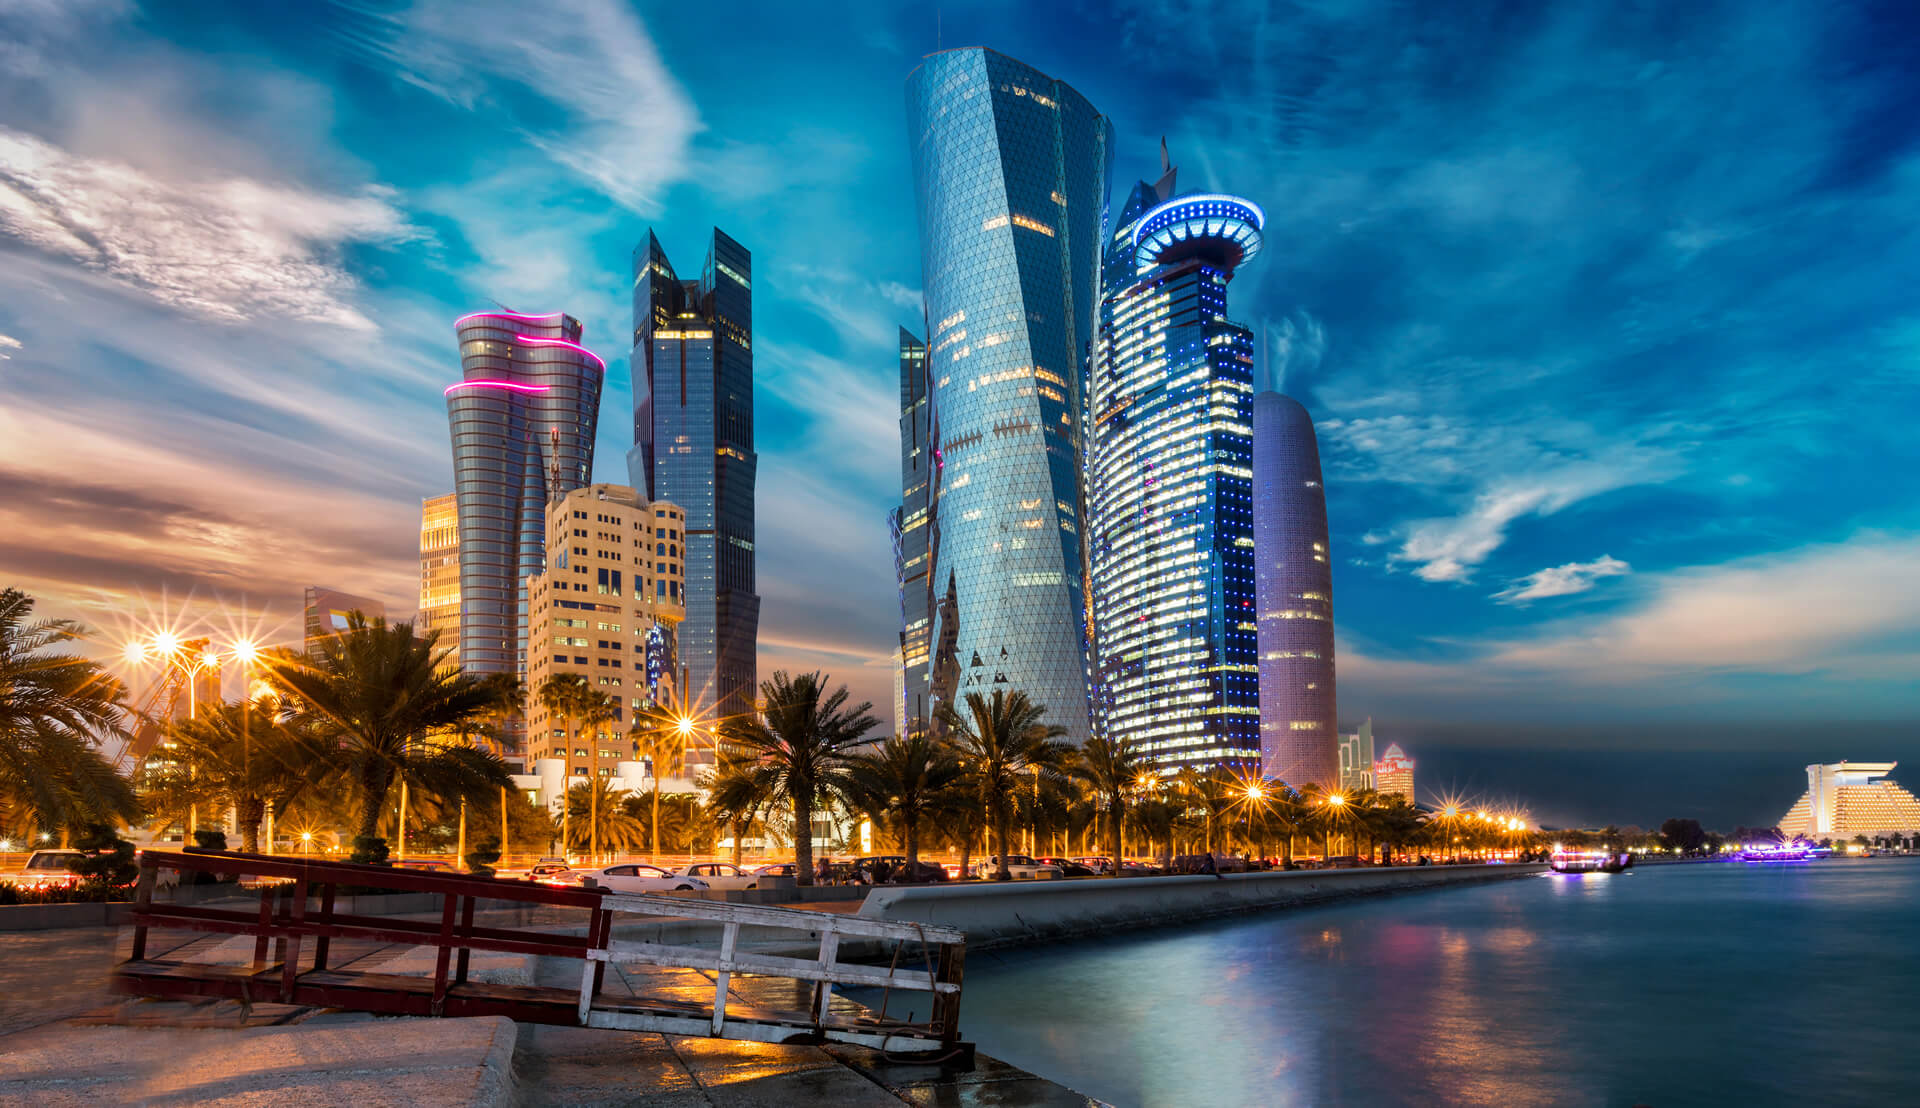 The skyline of Doha city center after sunset in Qatar